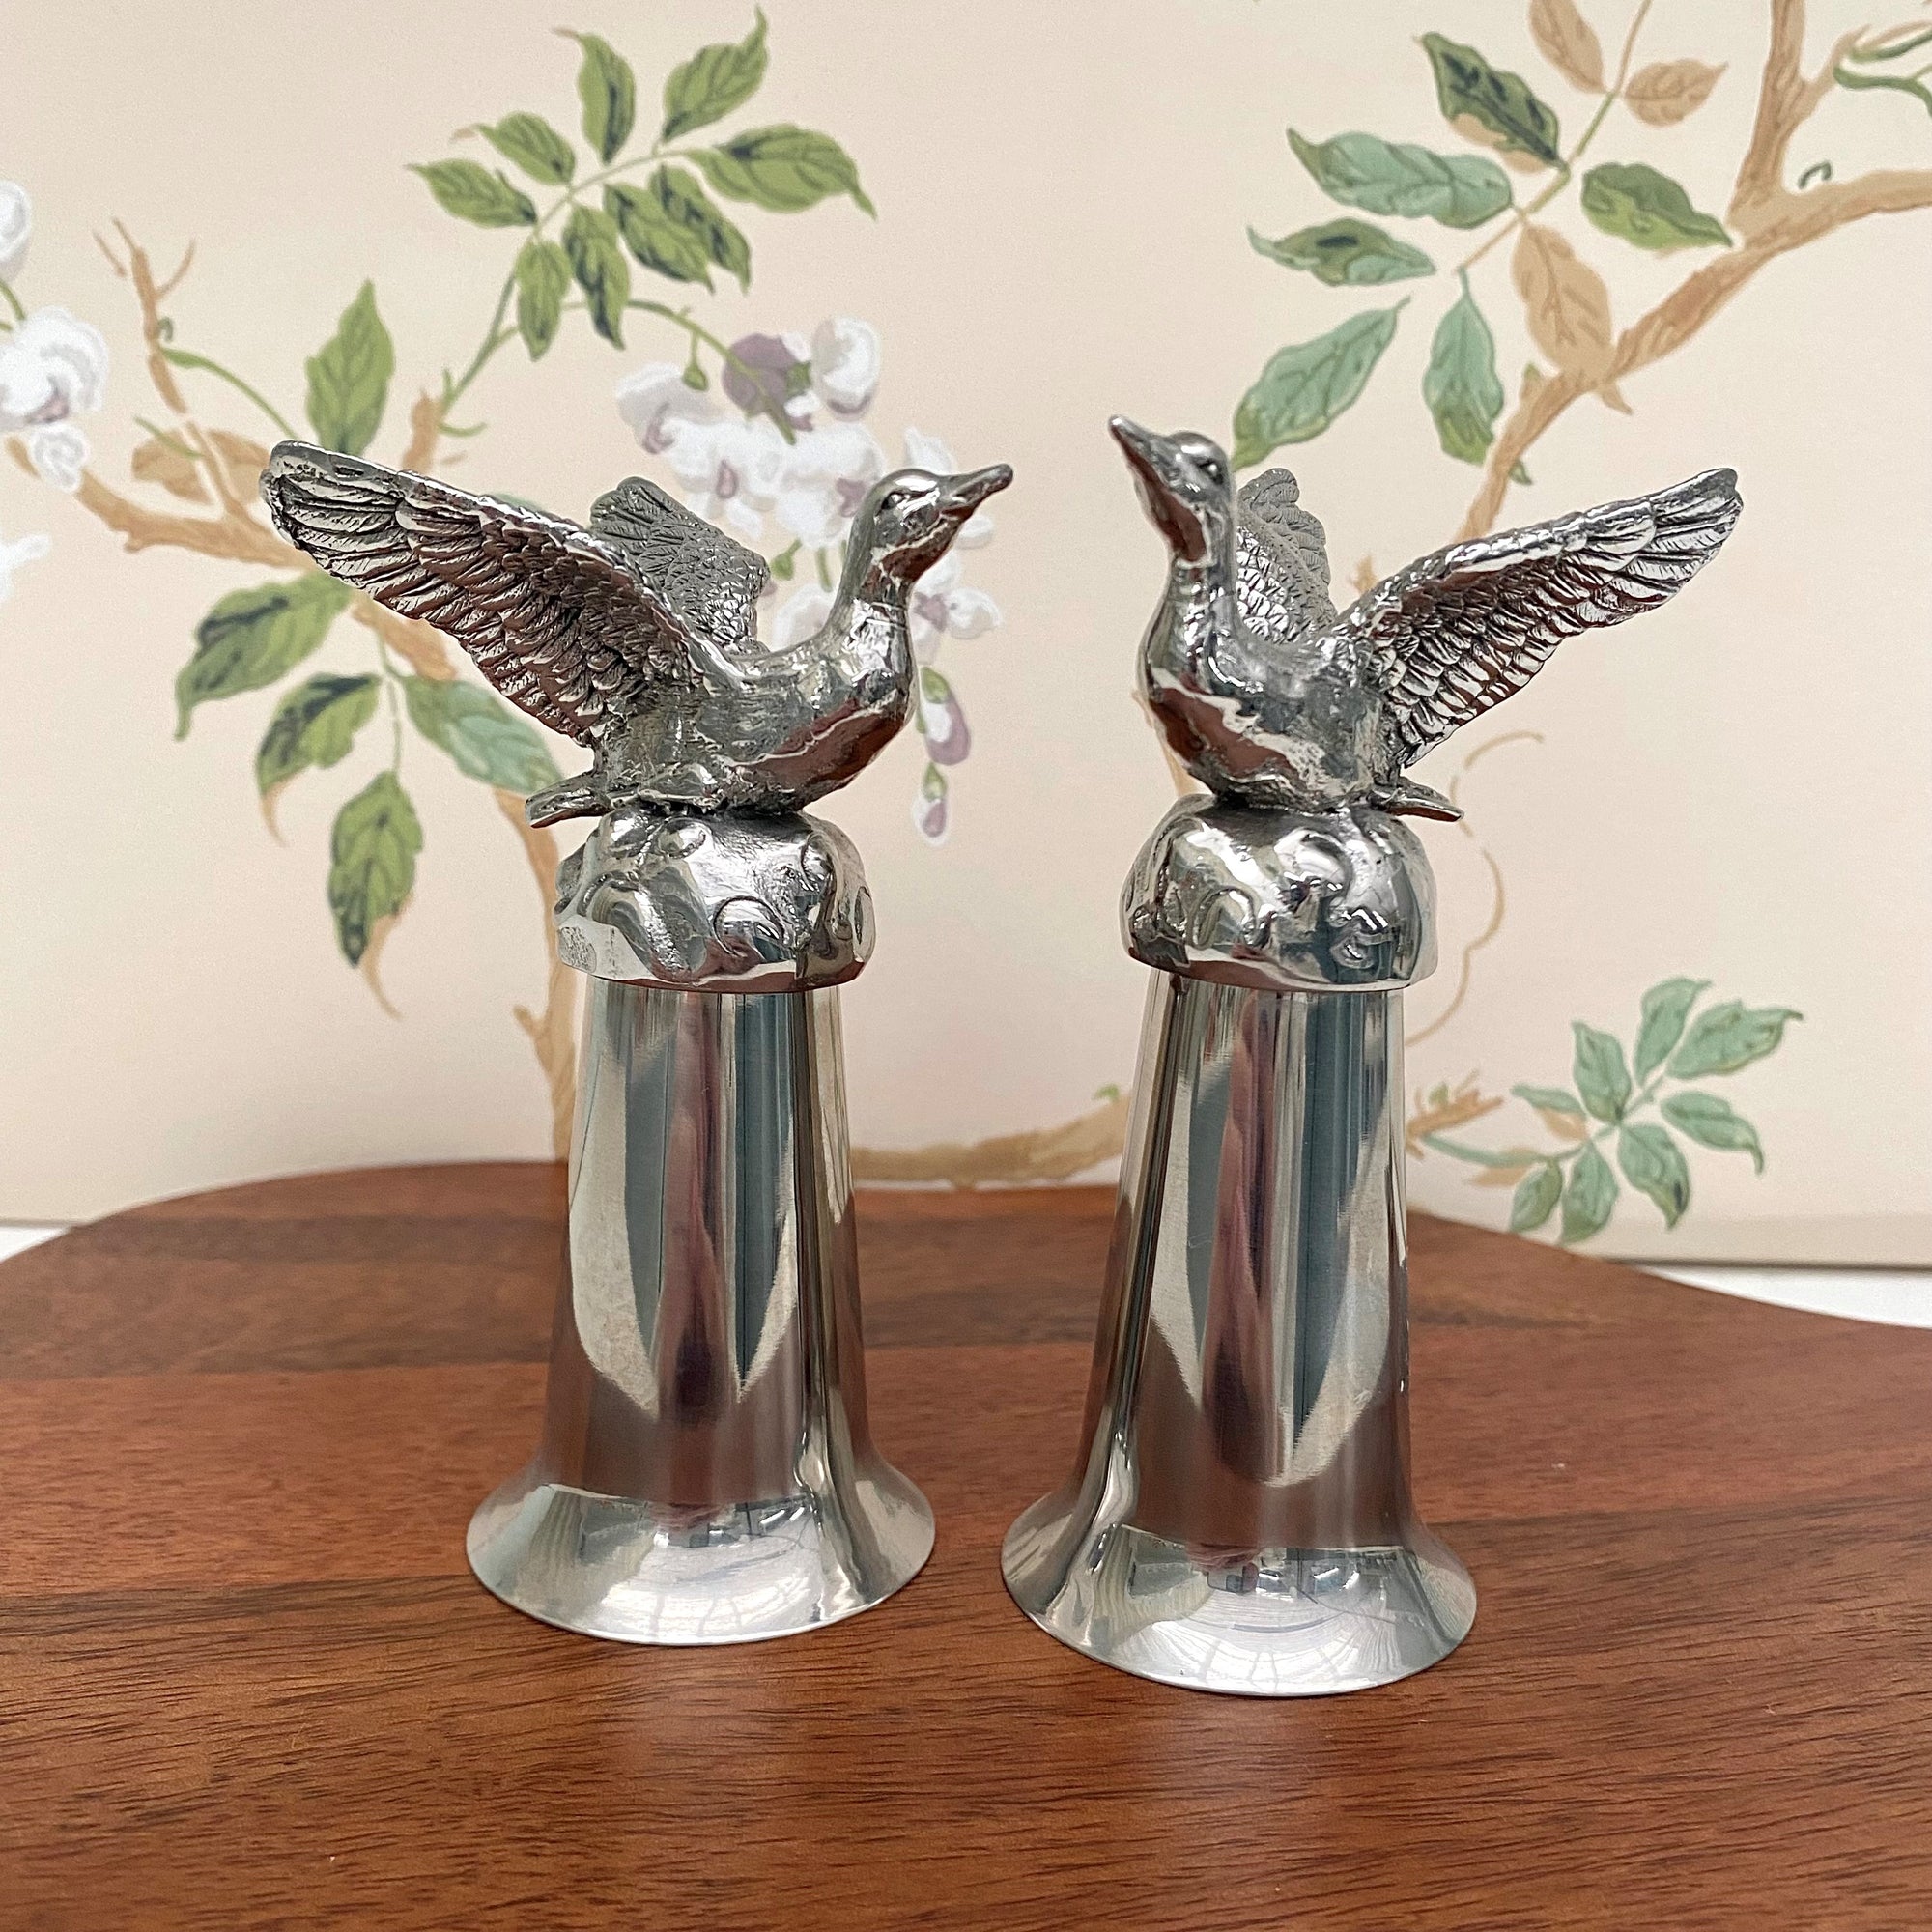 A Pair of flying geese shot glasses